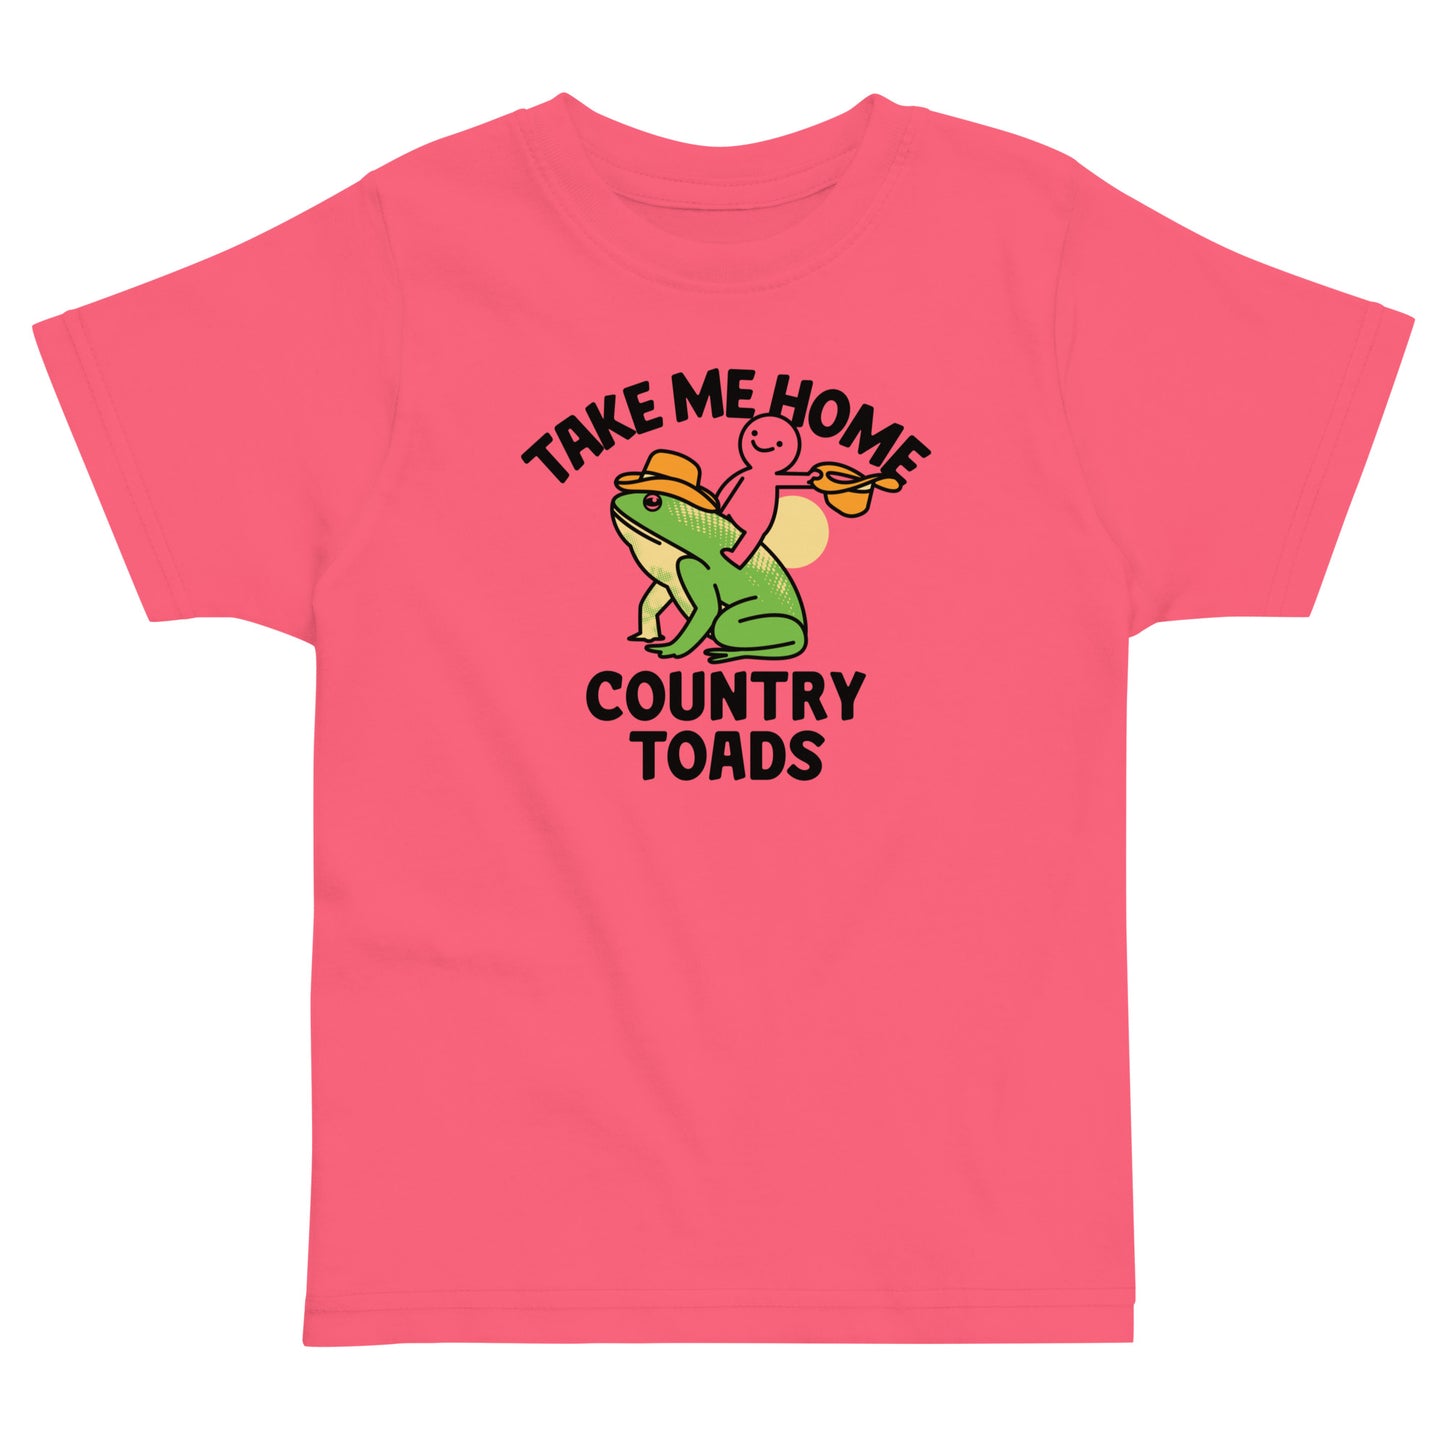 Take Me Home Country Toads Kid's Toddler Tee